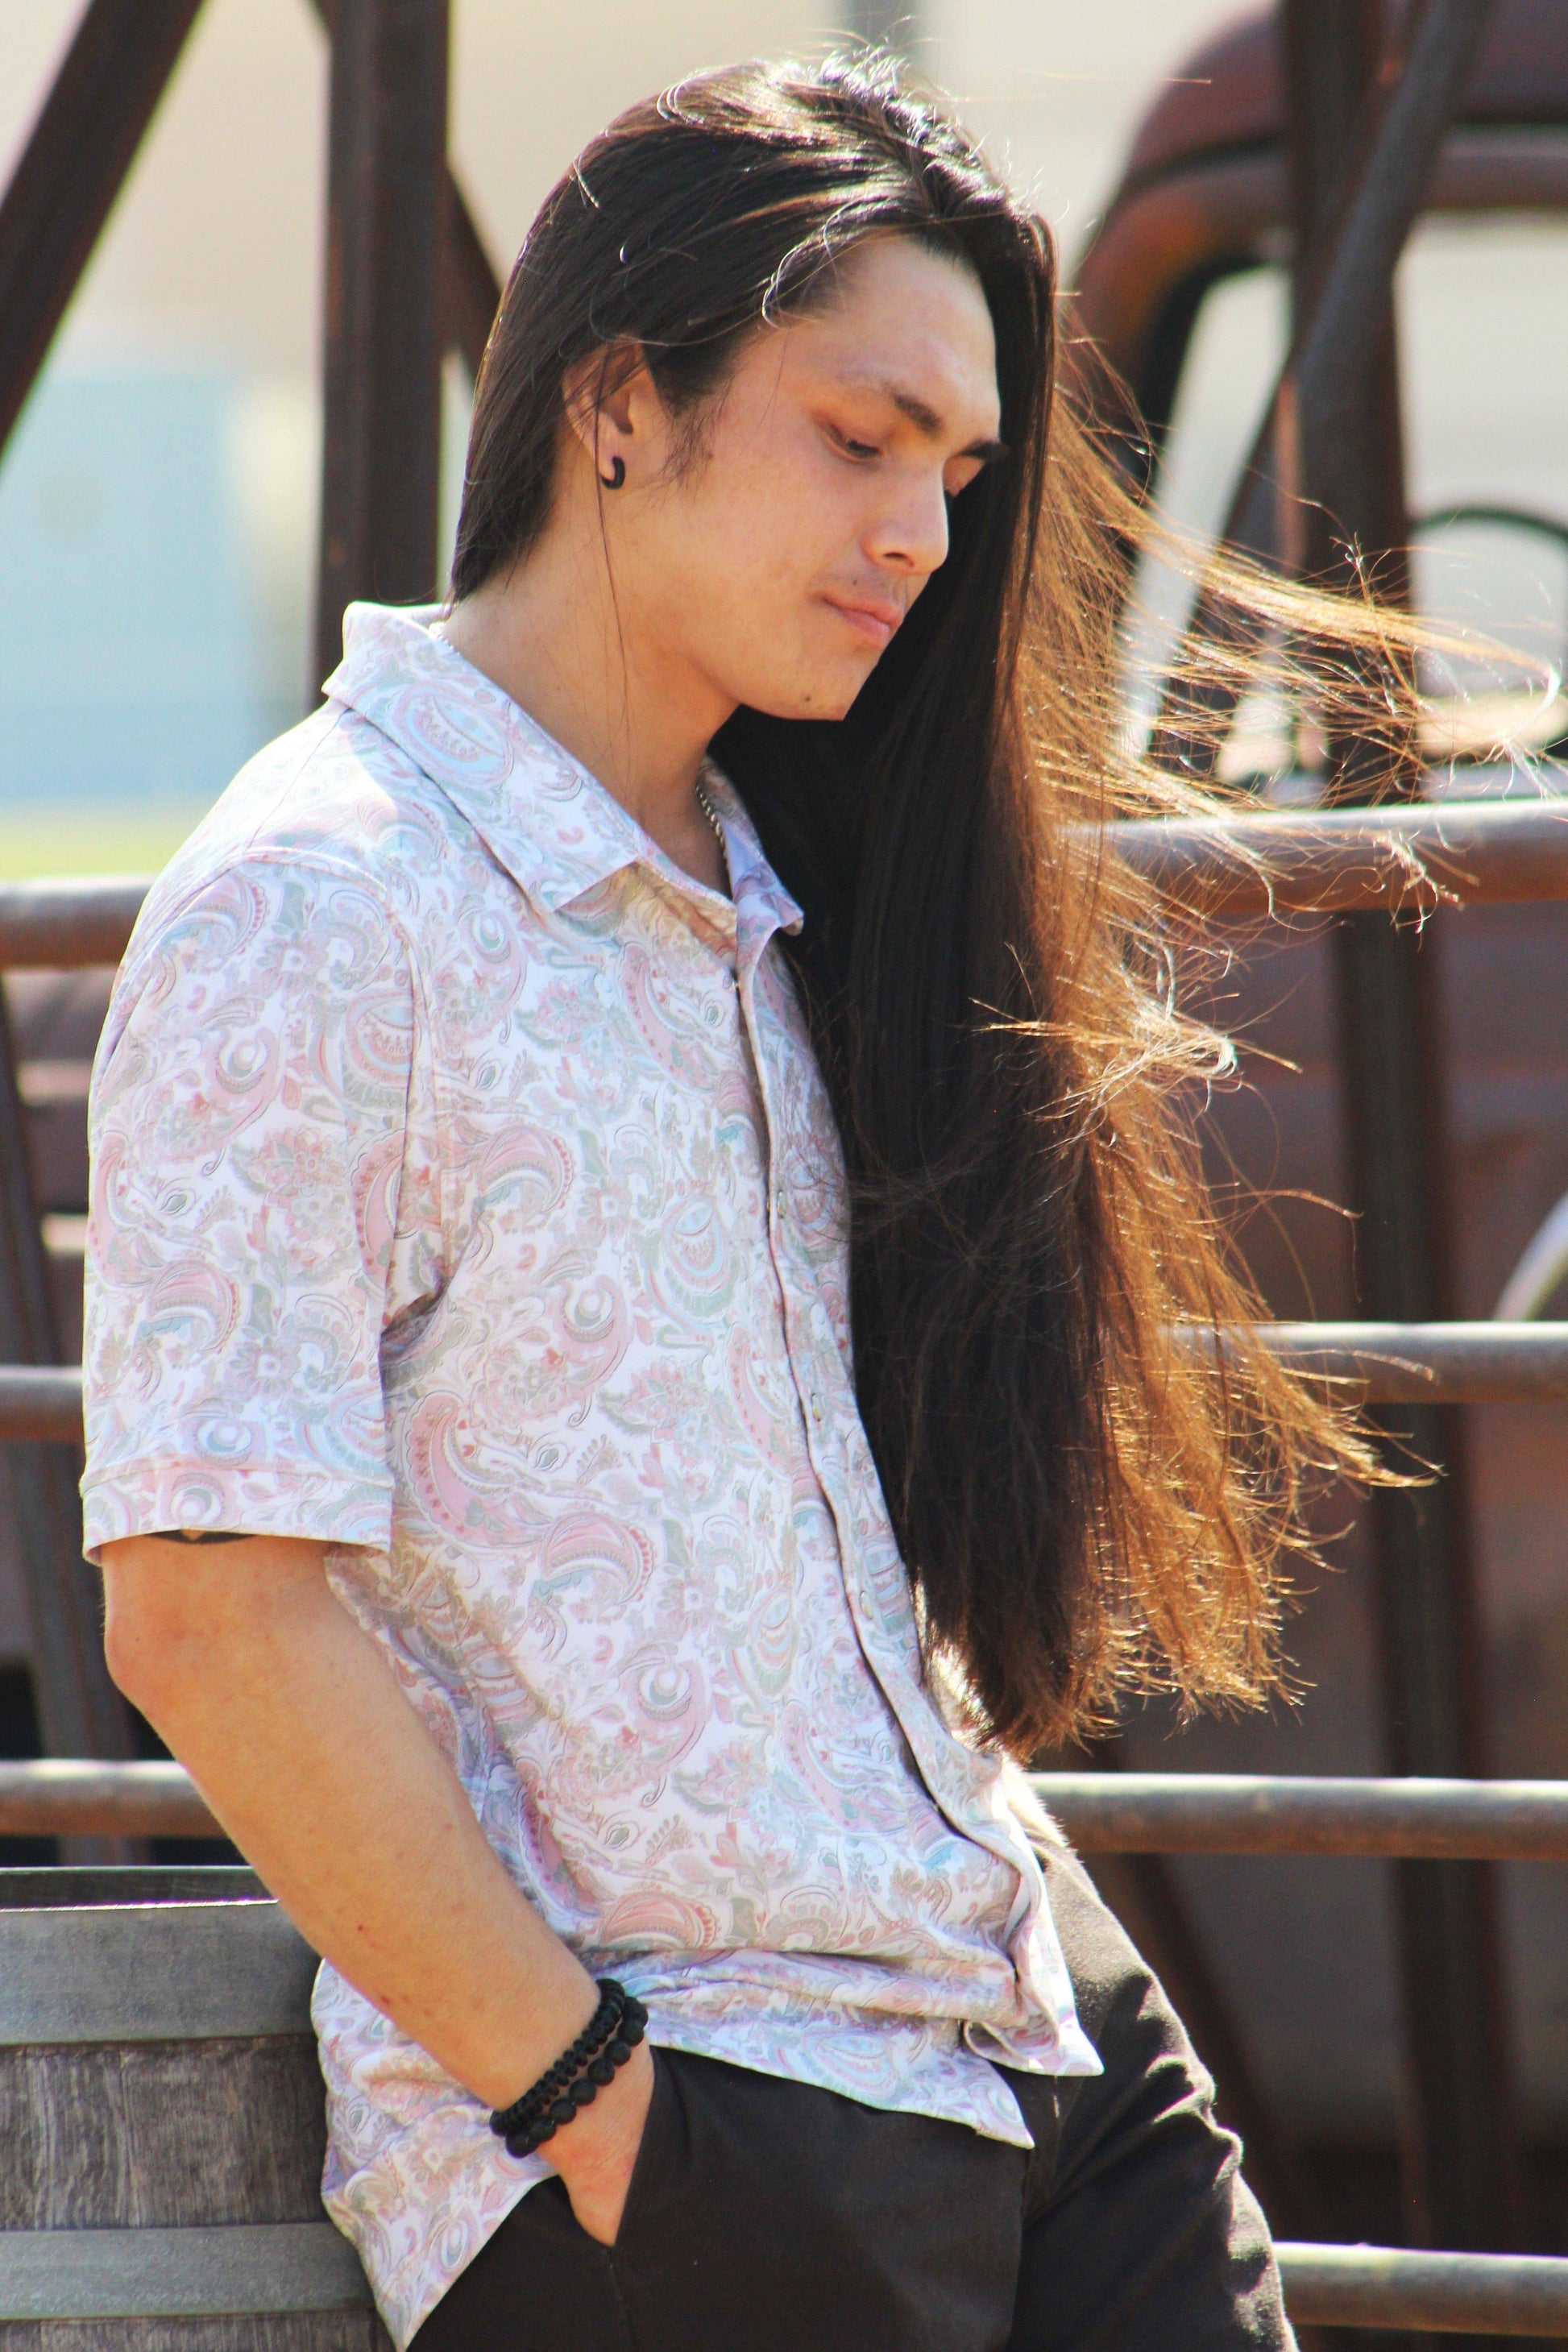 A close-up view of a man wearing the Green Love Paisley shirt, capturing the intricate paisley print and subtle pastel hues. The shirt features a relaxed fit and a pointed collar, styled with the sleeves casually rolled up. His long, wind-touched hair adds a sense of movement to the image, emphasizing the lightweight fabric of the shirt.